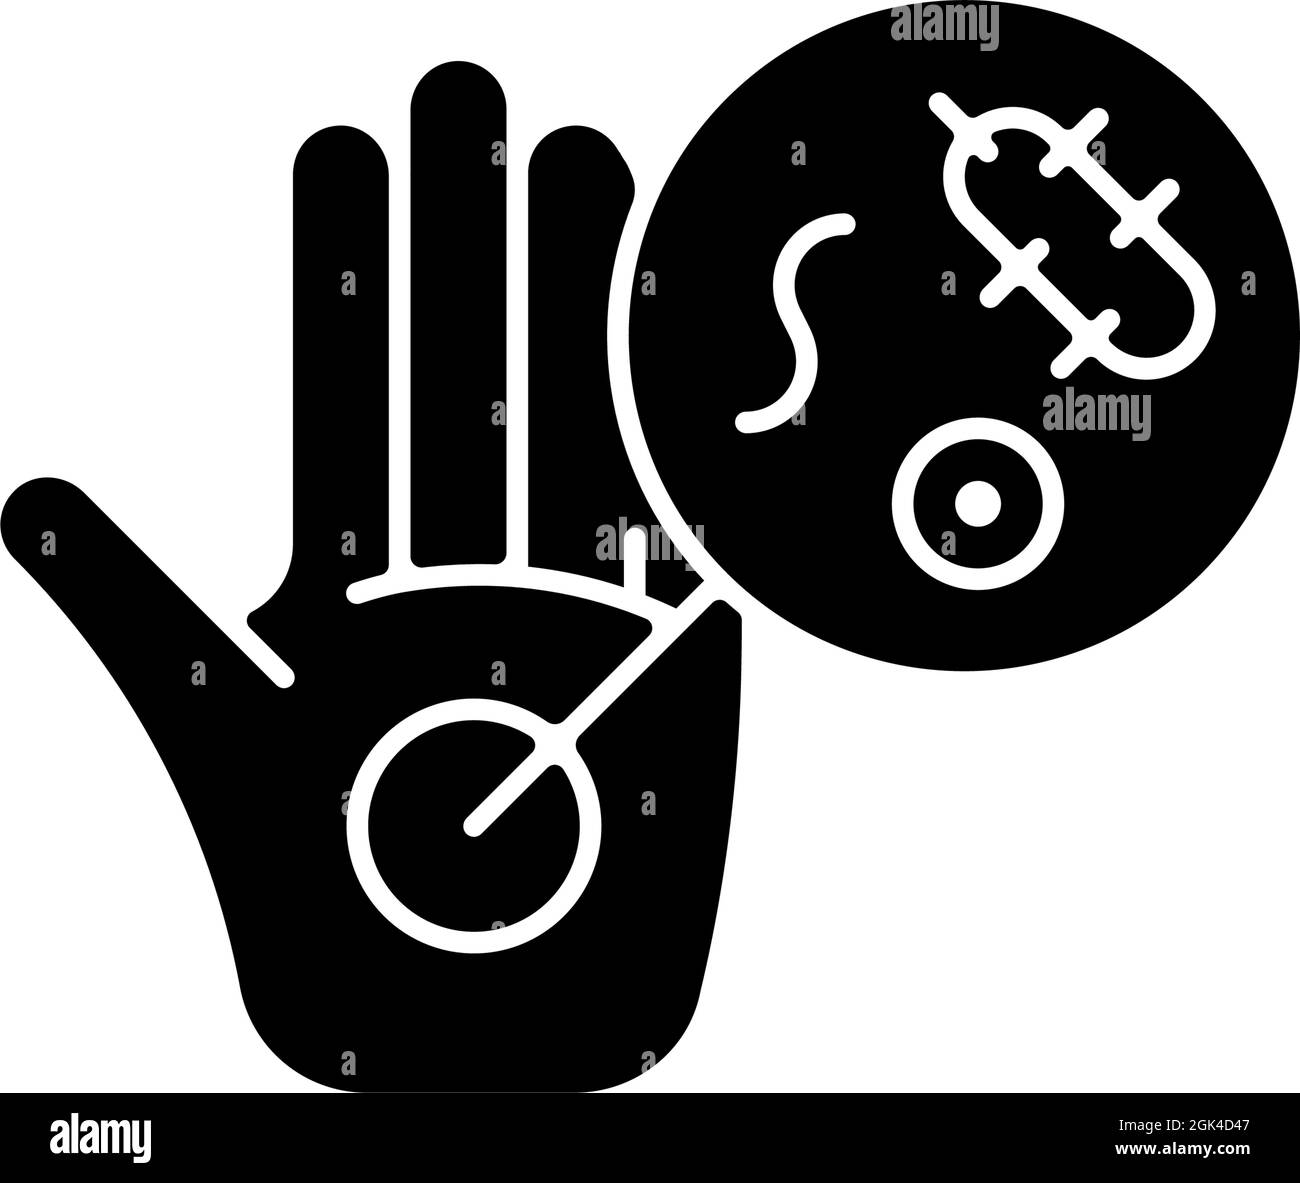 Dirty hands black glyph icon Stock Vector